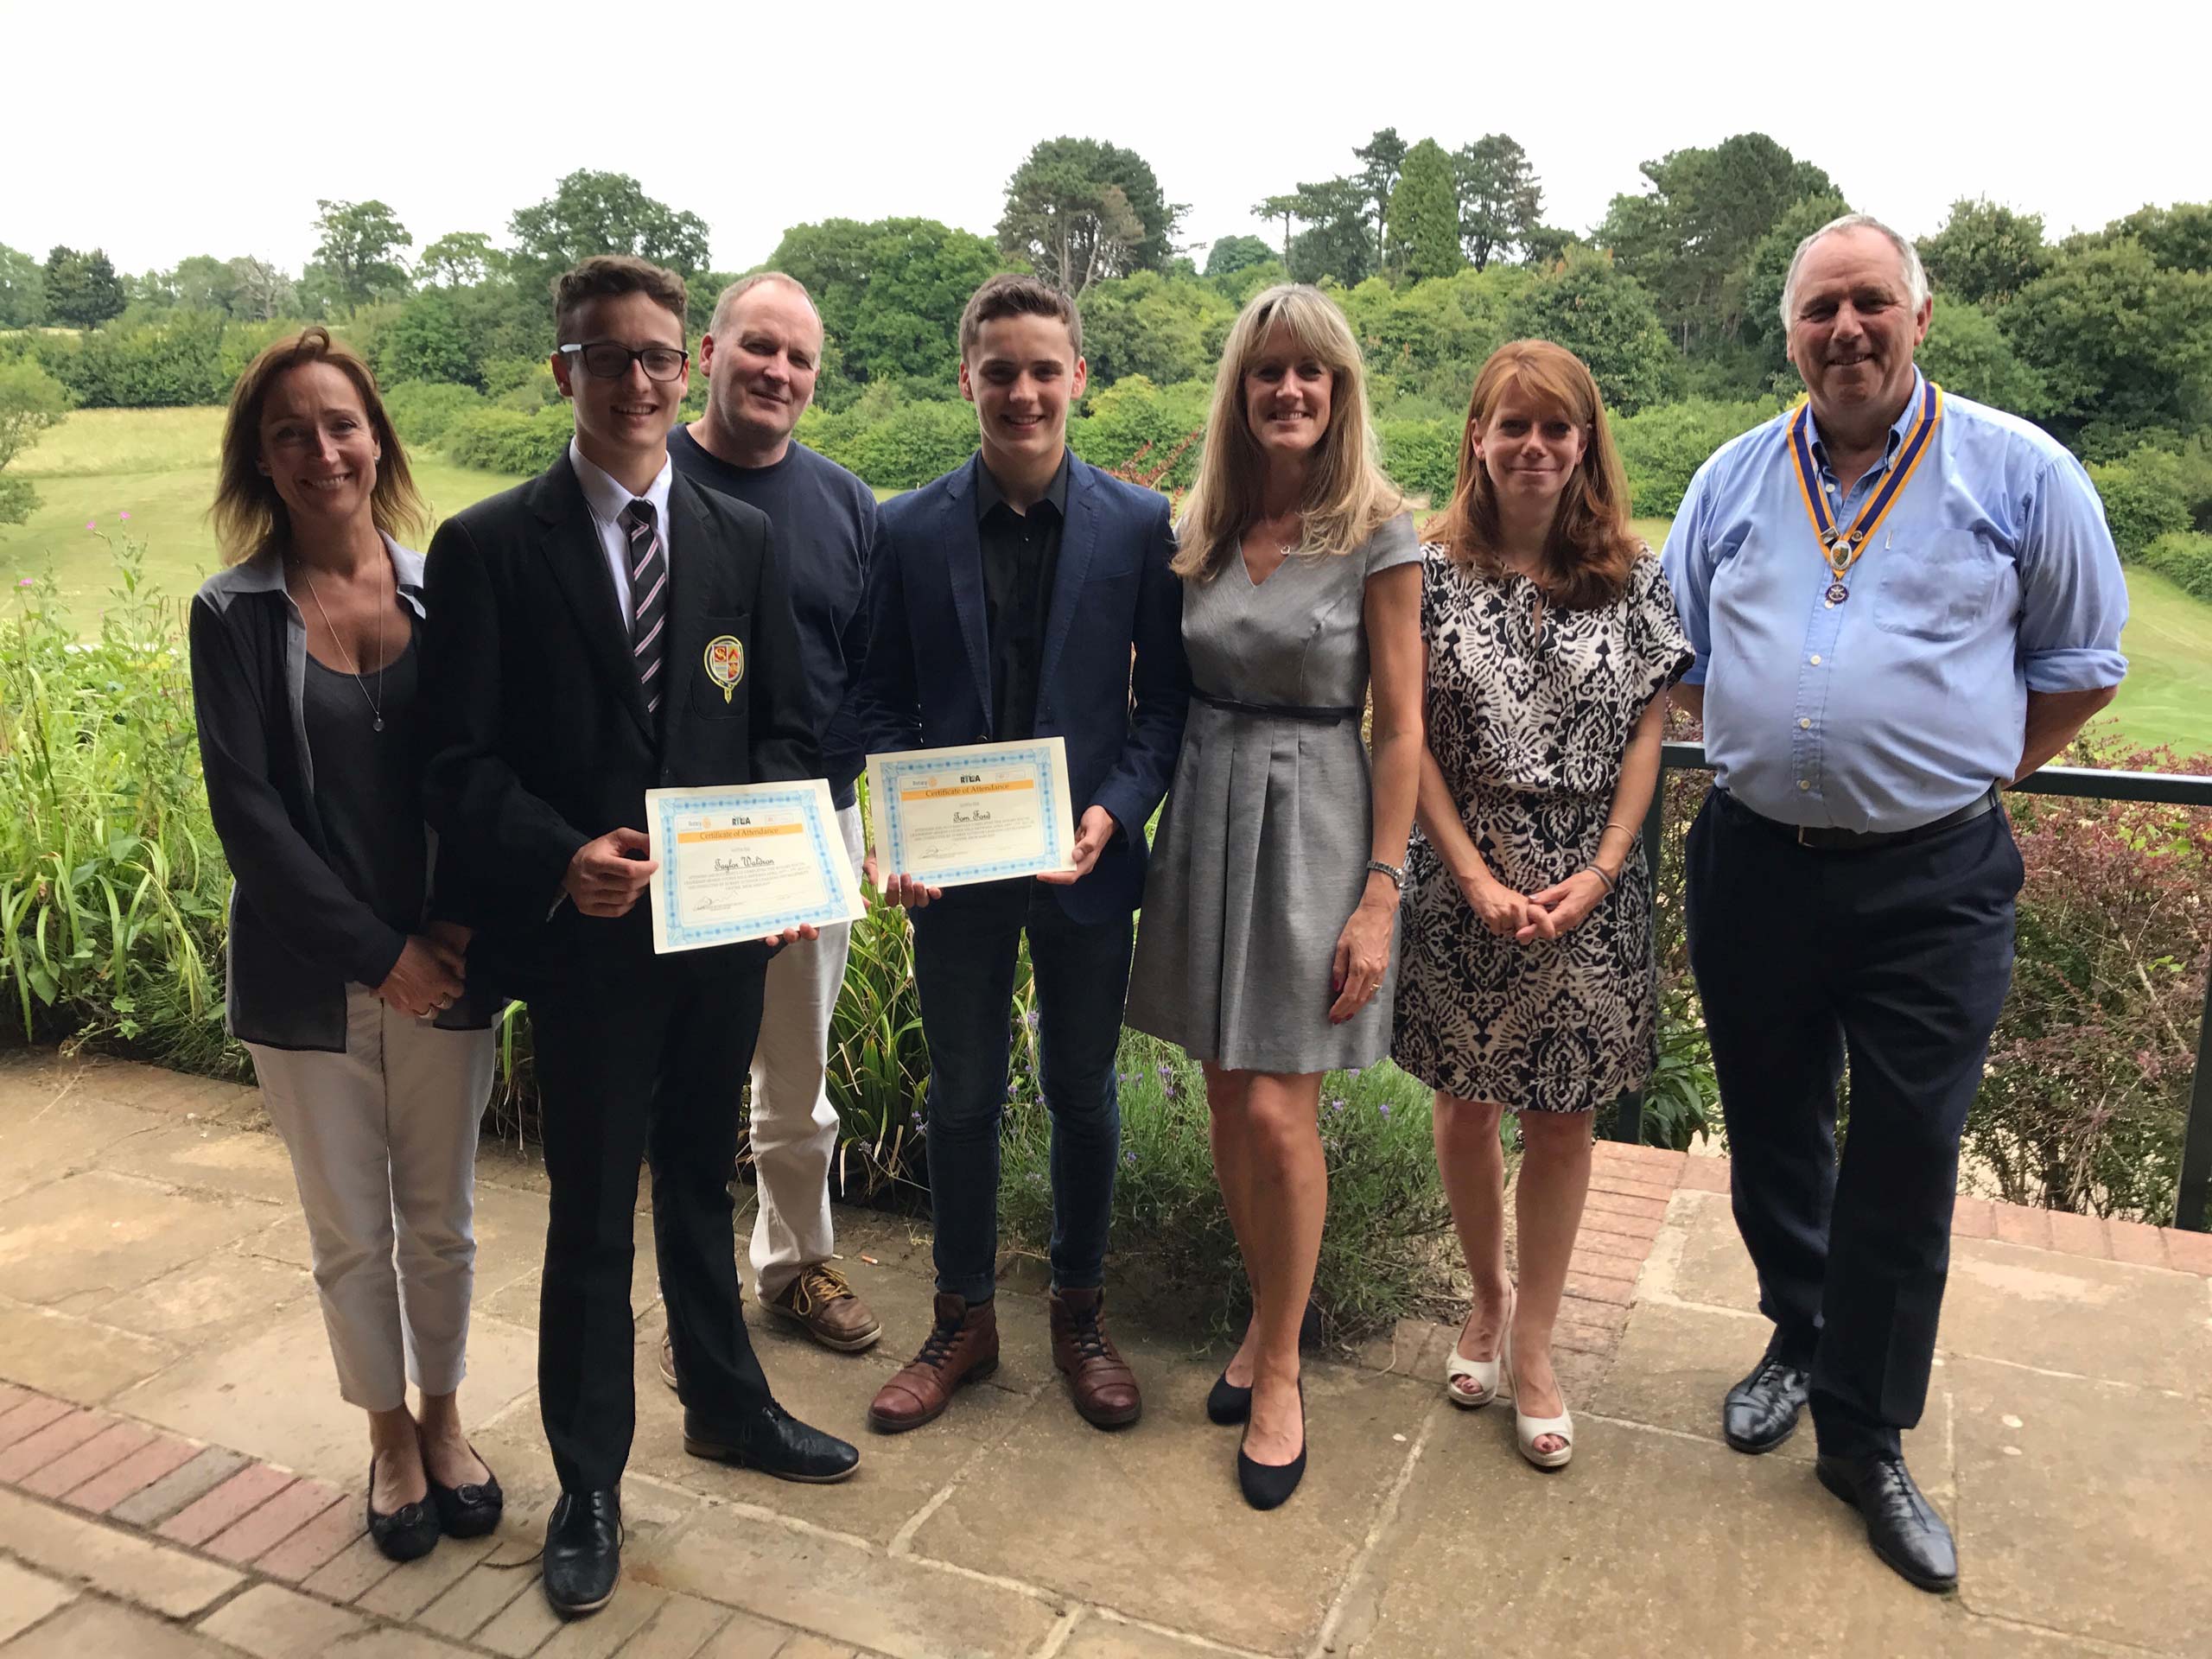 Caterham Rotary Club leadership award for local students.